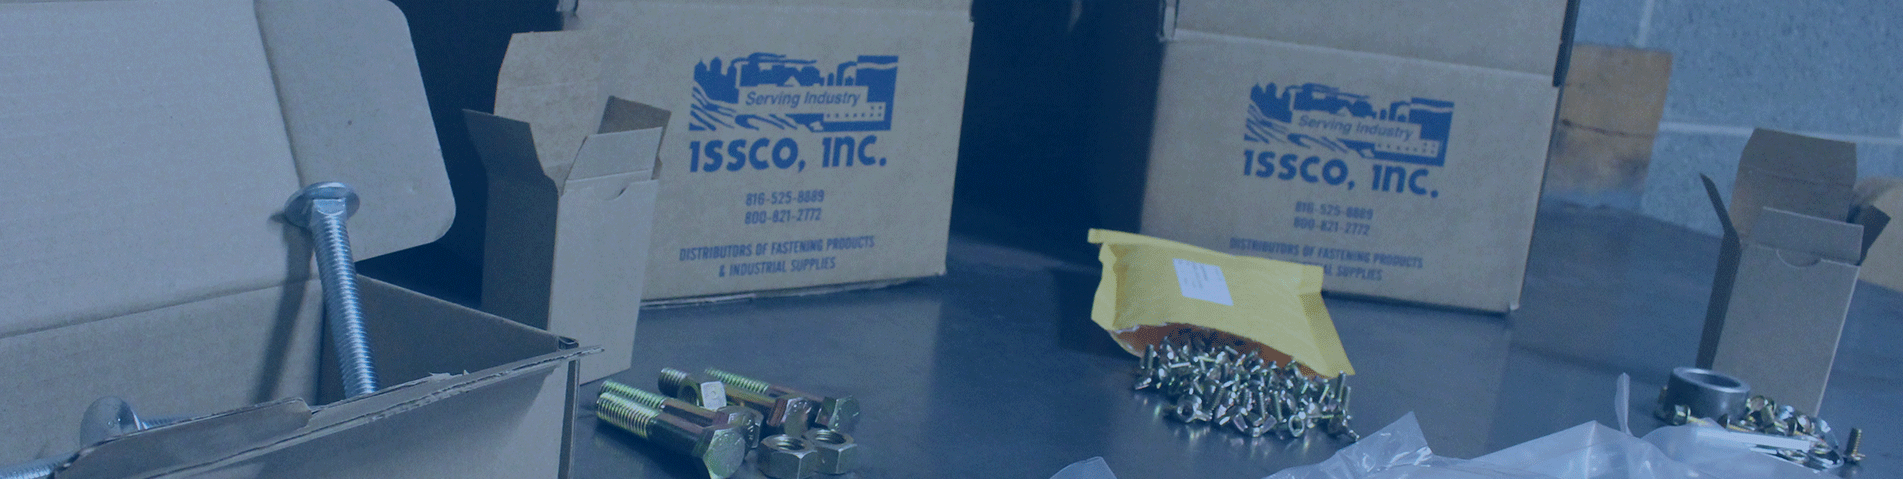 ISSCO boxes containing fasteners on a table